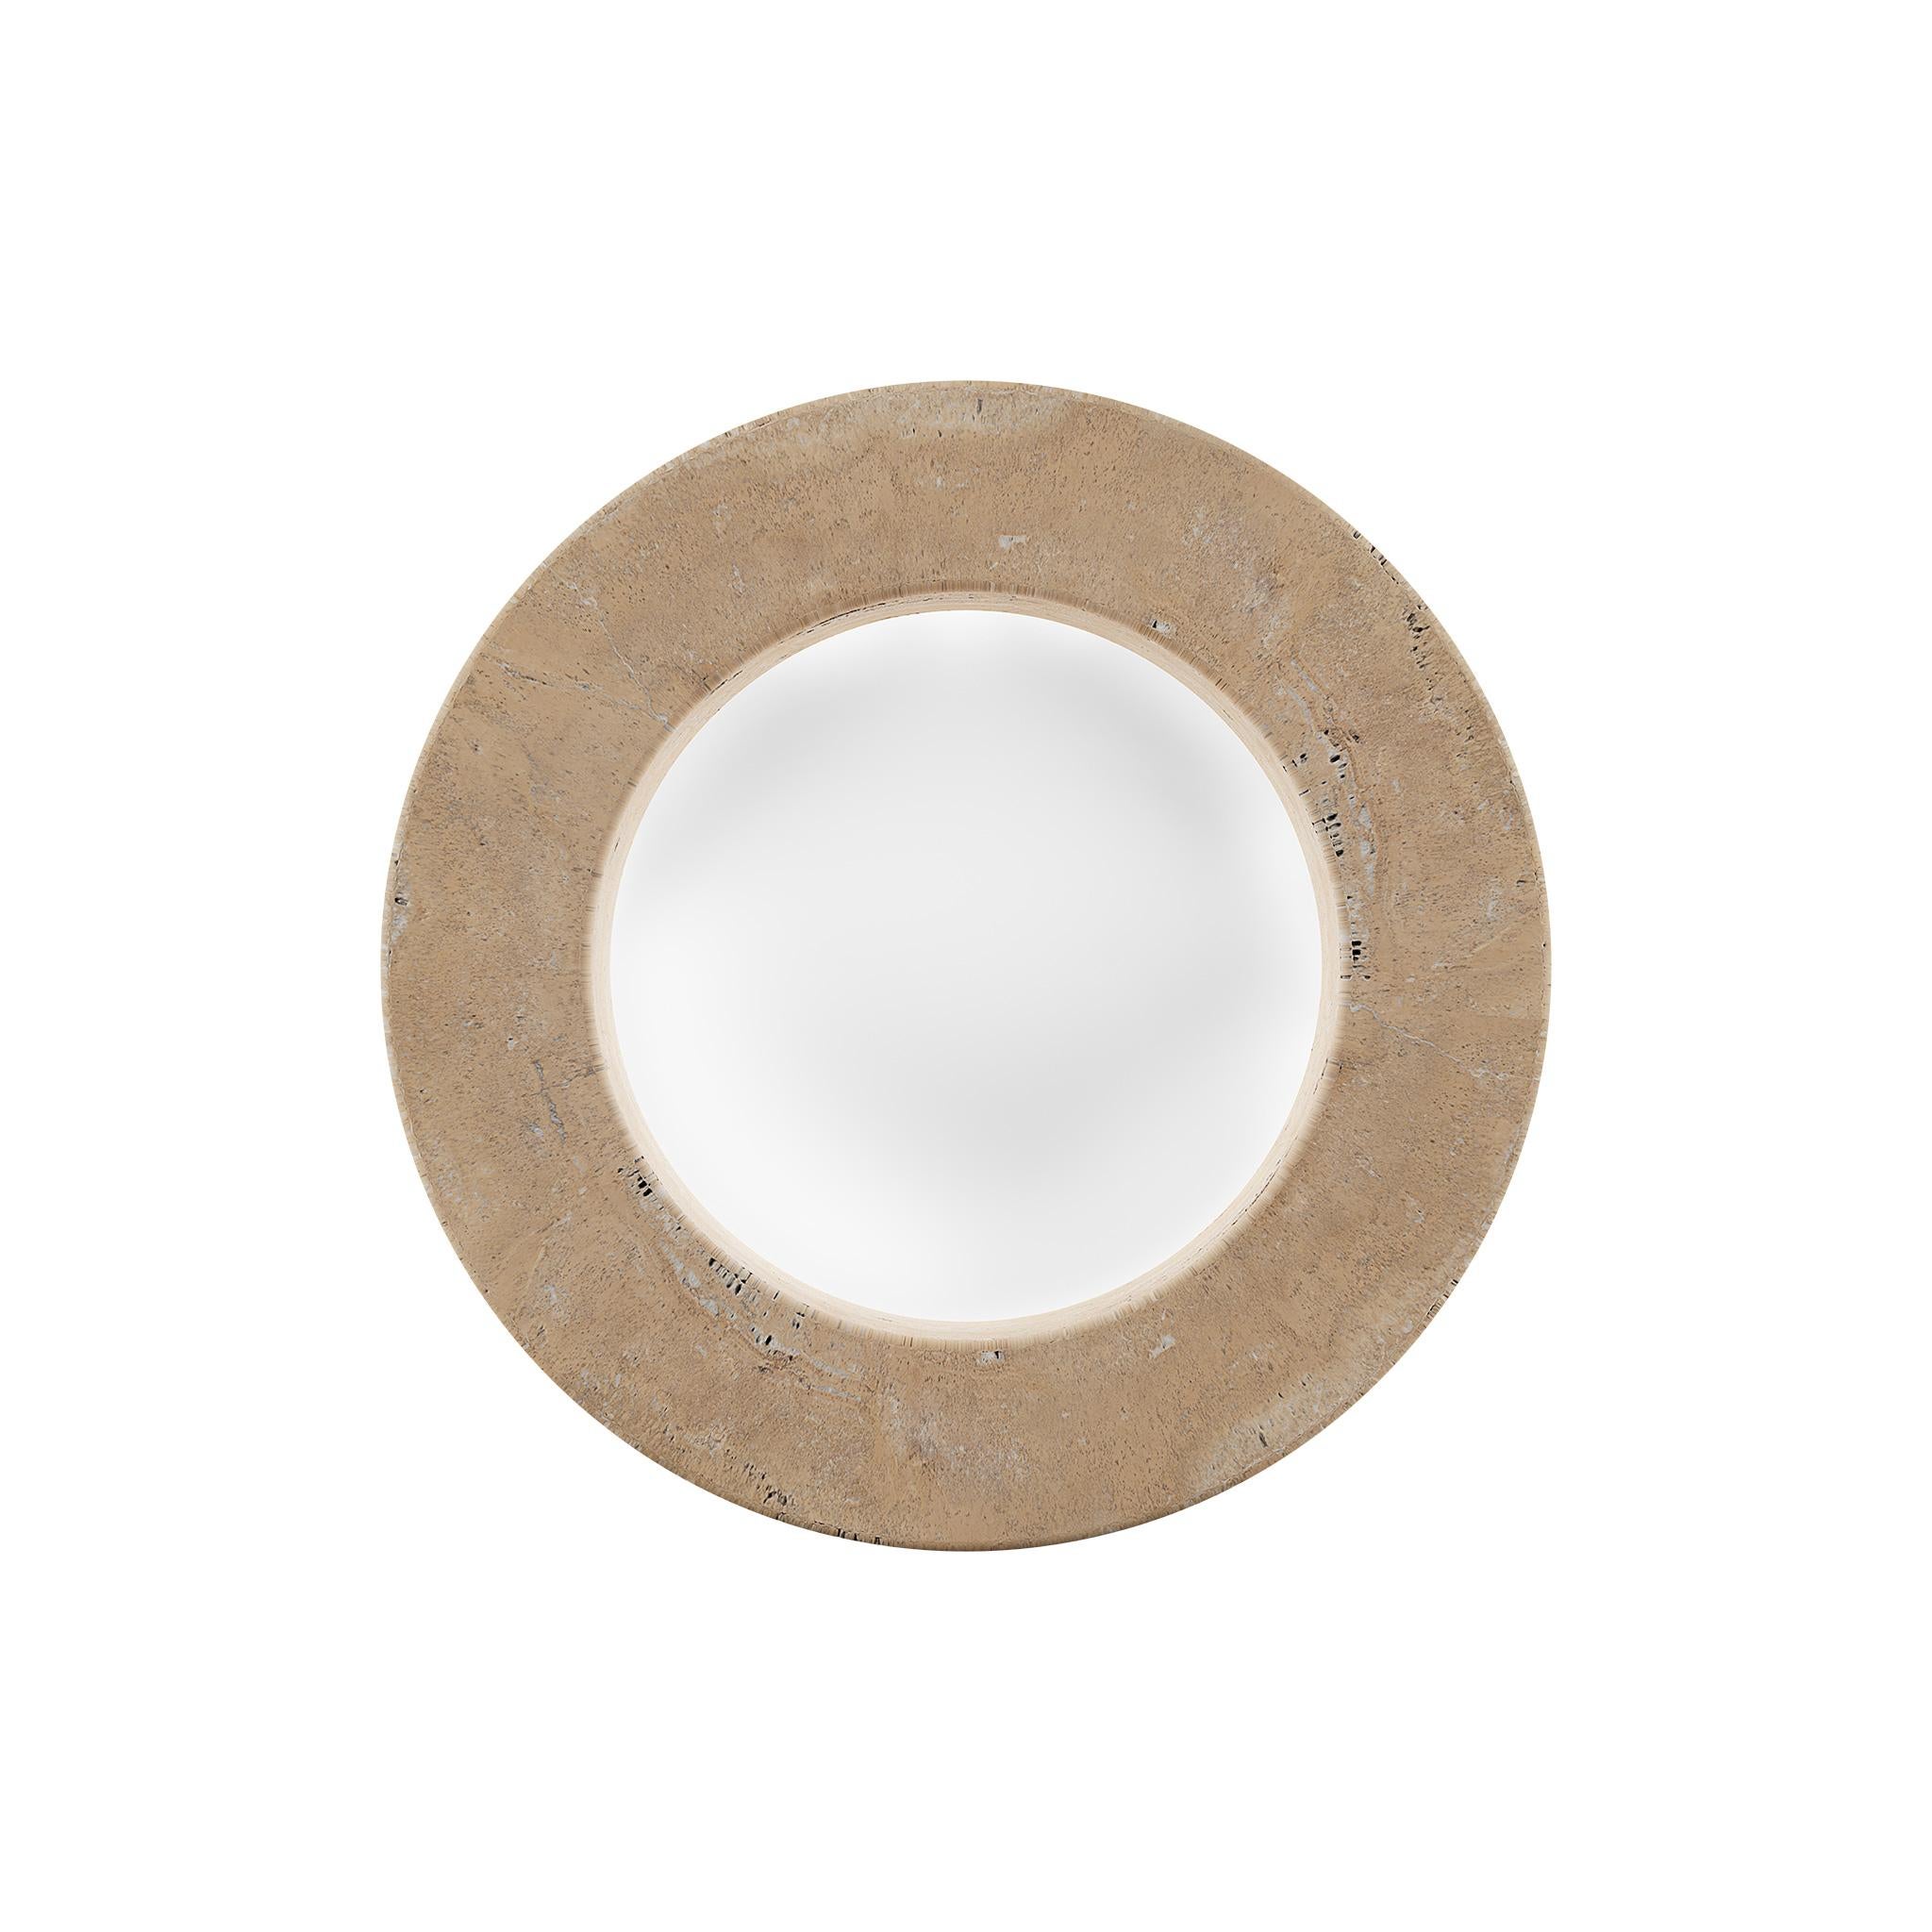 Hand-Carved Organic Modern Round Wall Lamp, Beje Travertine Marble Circular Shape Sconce For Sale